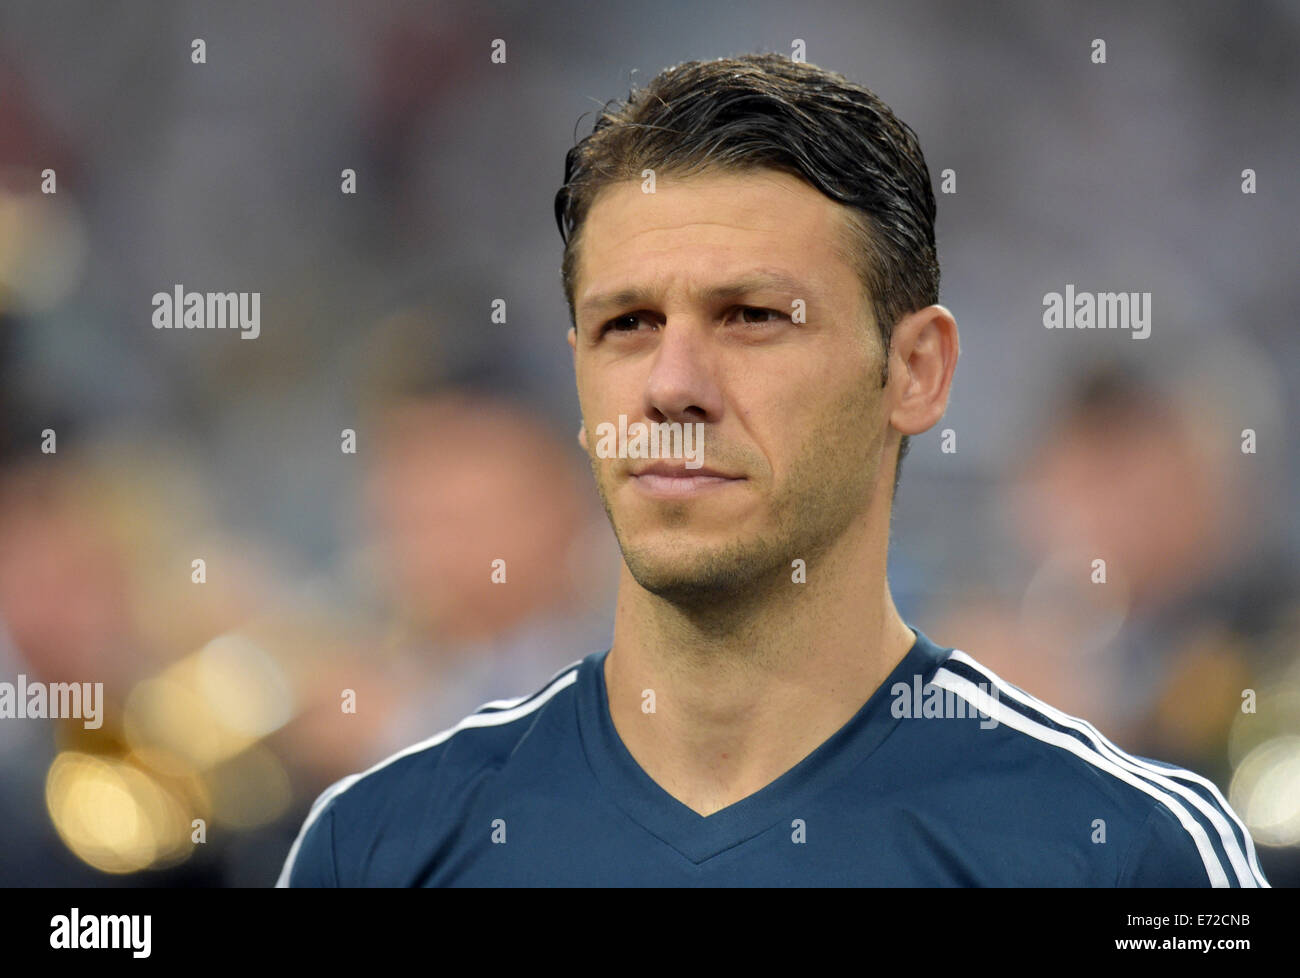 Duesseldorf, Germany. 03rd Sep, 2014. Argentina's Martin Demichelis during the international match between Germany and Argentina at Esprit Arena in Duesseldorf, Germany, 03 September 2014. Photo: BERND THISSEN/dpa/Alamy Live News Stock Photo